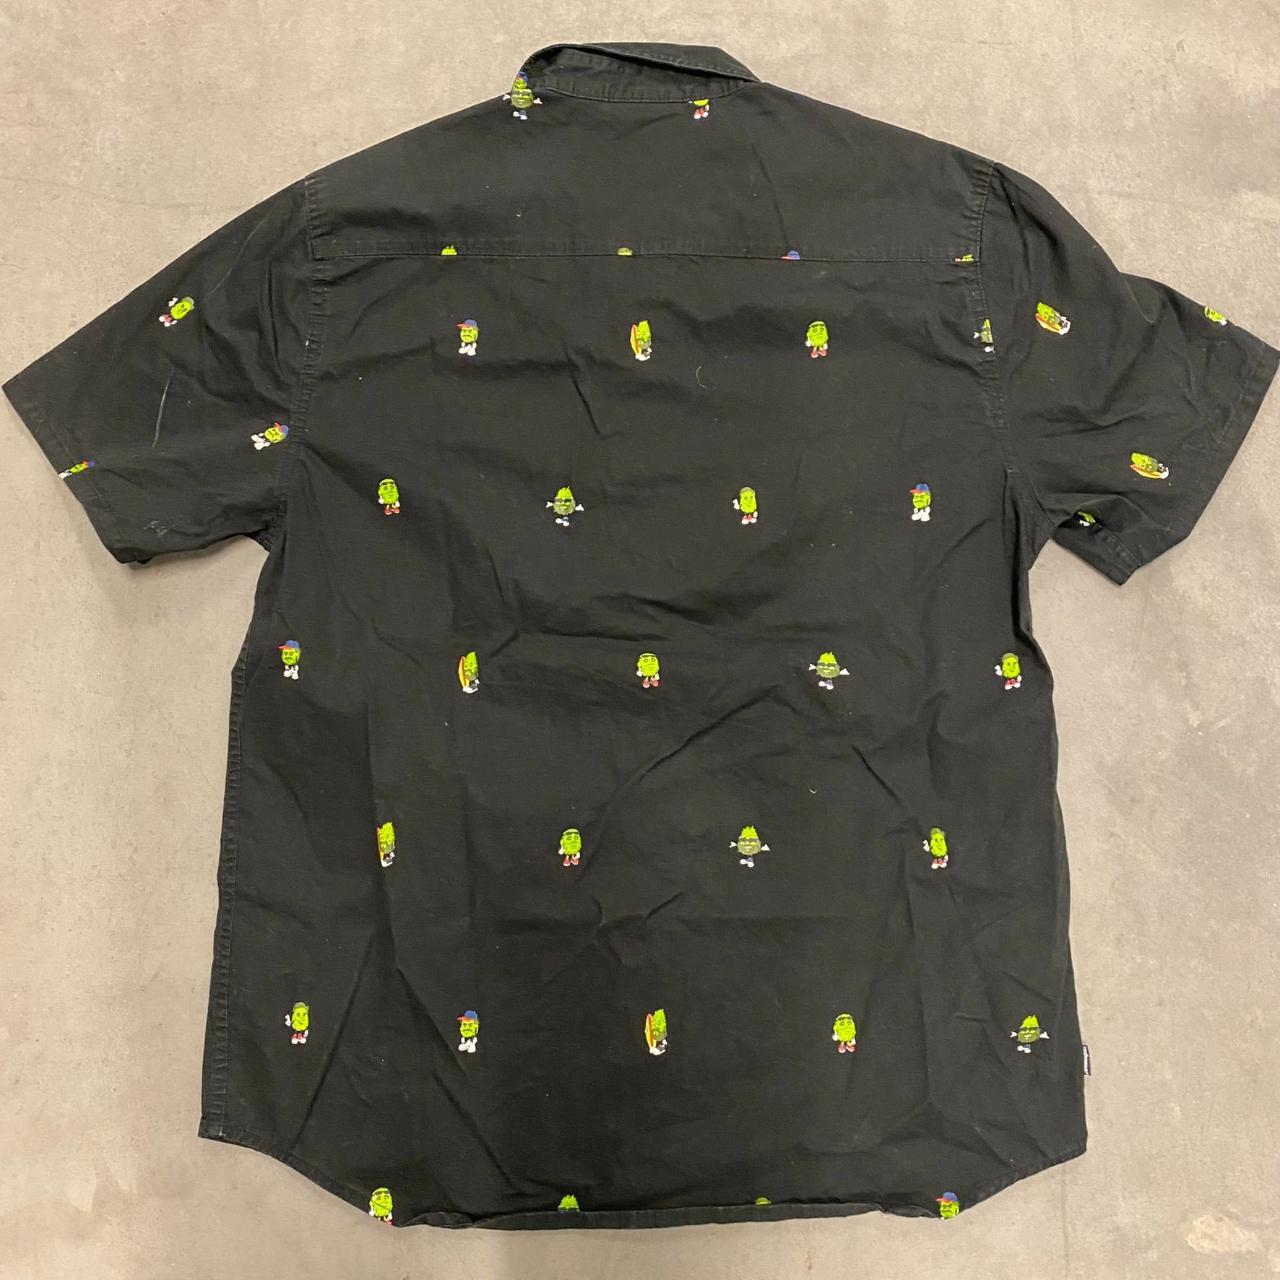 Product Image 4 - The Hundreds Bean Shirt
Size: XL
Chest: